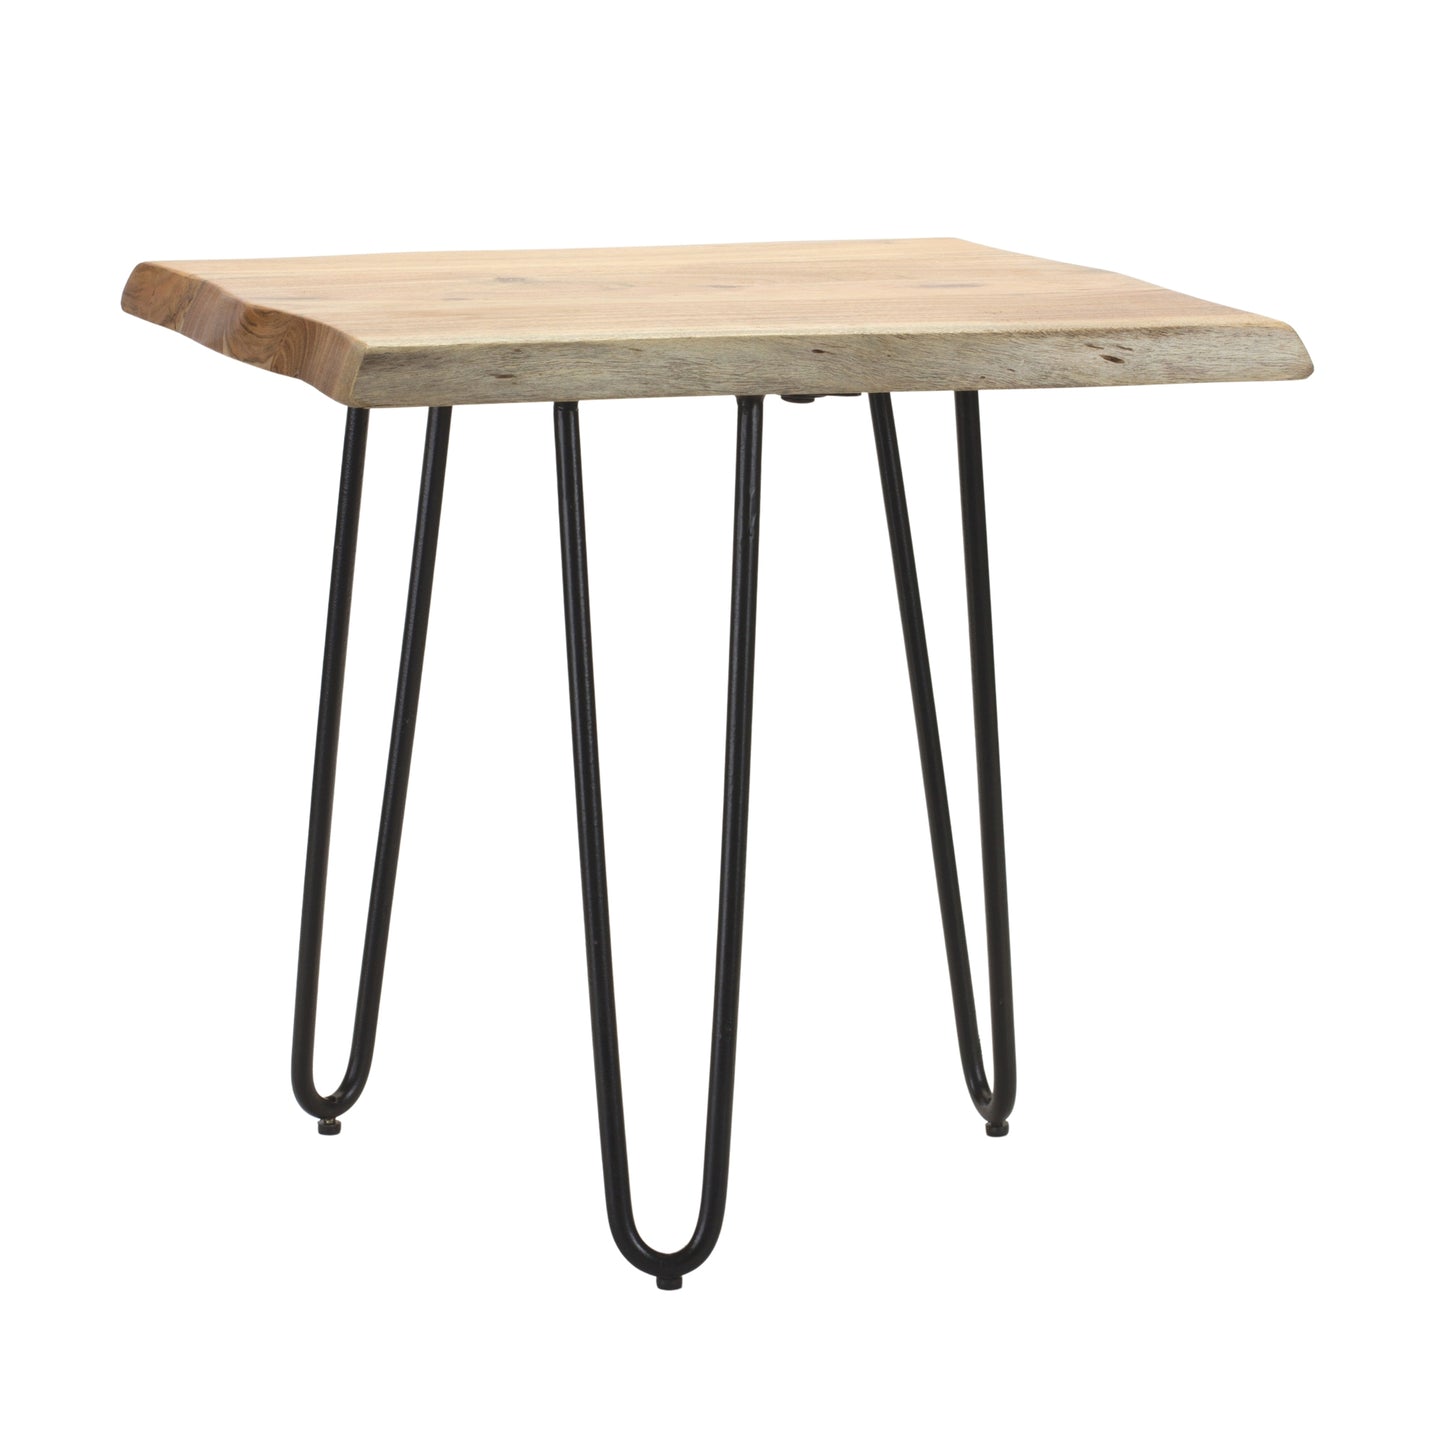 Natural Wood Slab Stool Table with Iron Legs 17.75"H